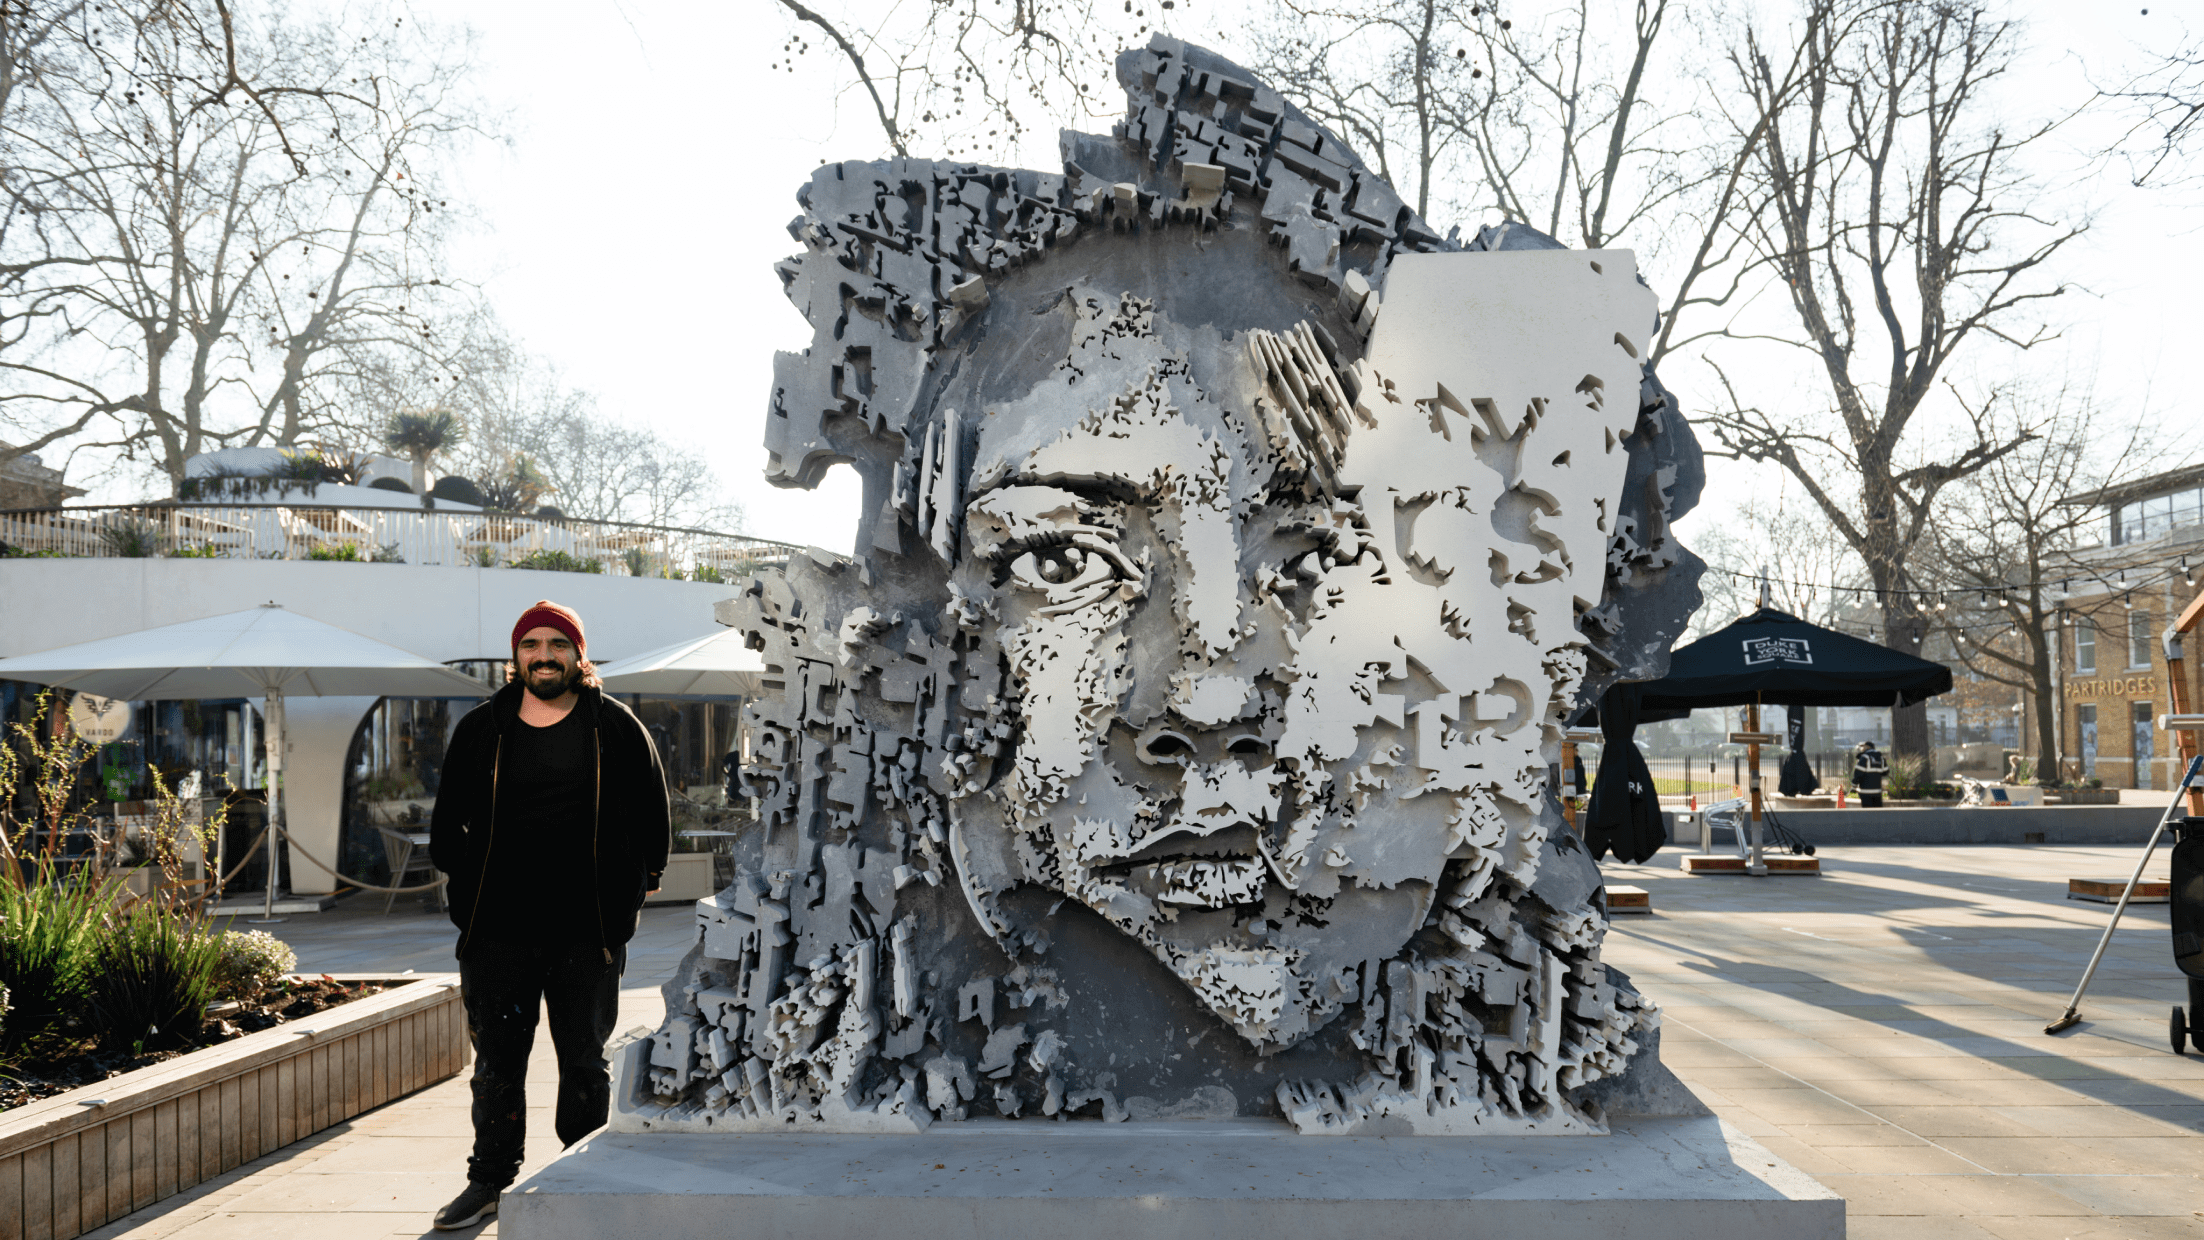 The artist, VHILS, stands by his installed work.